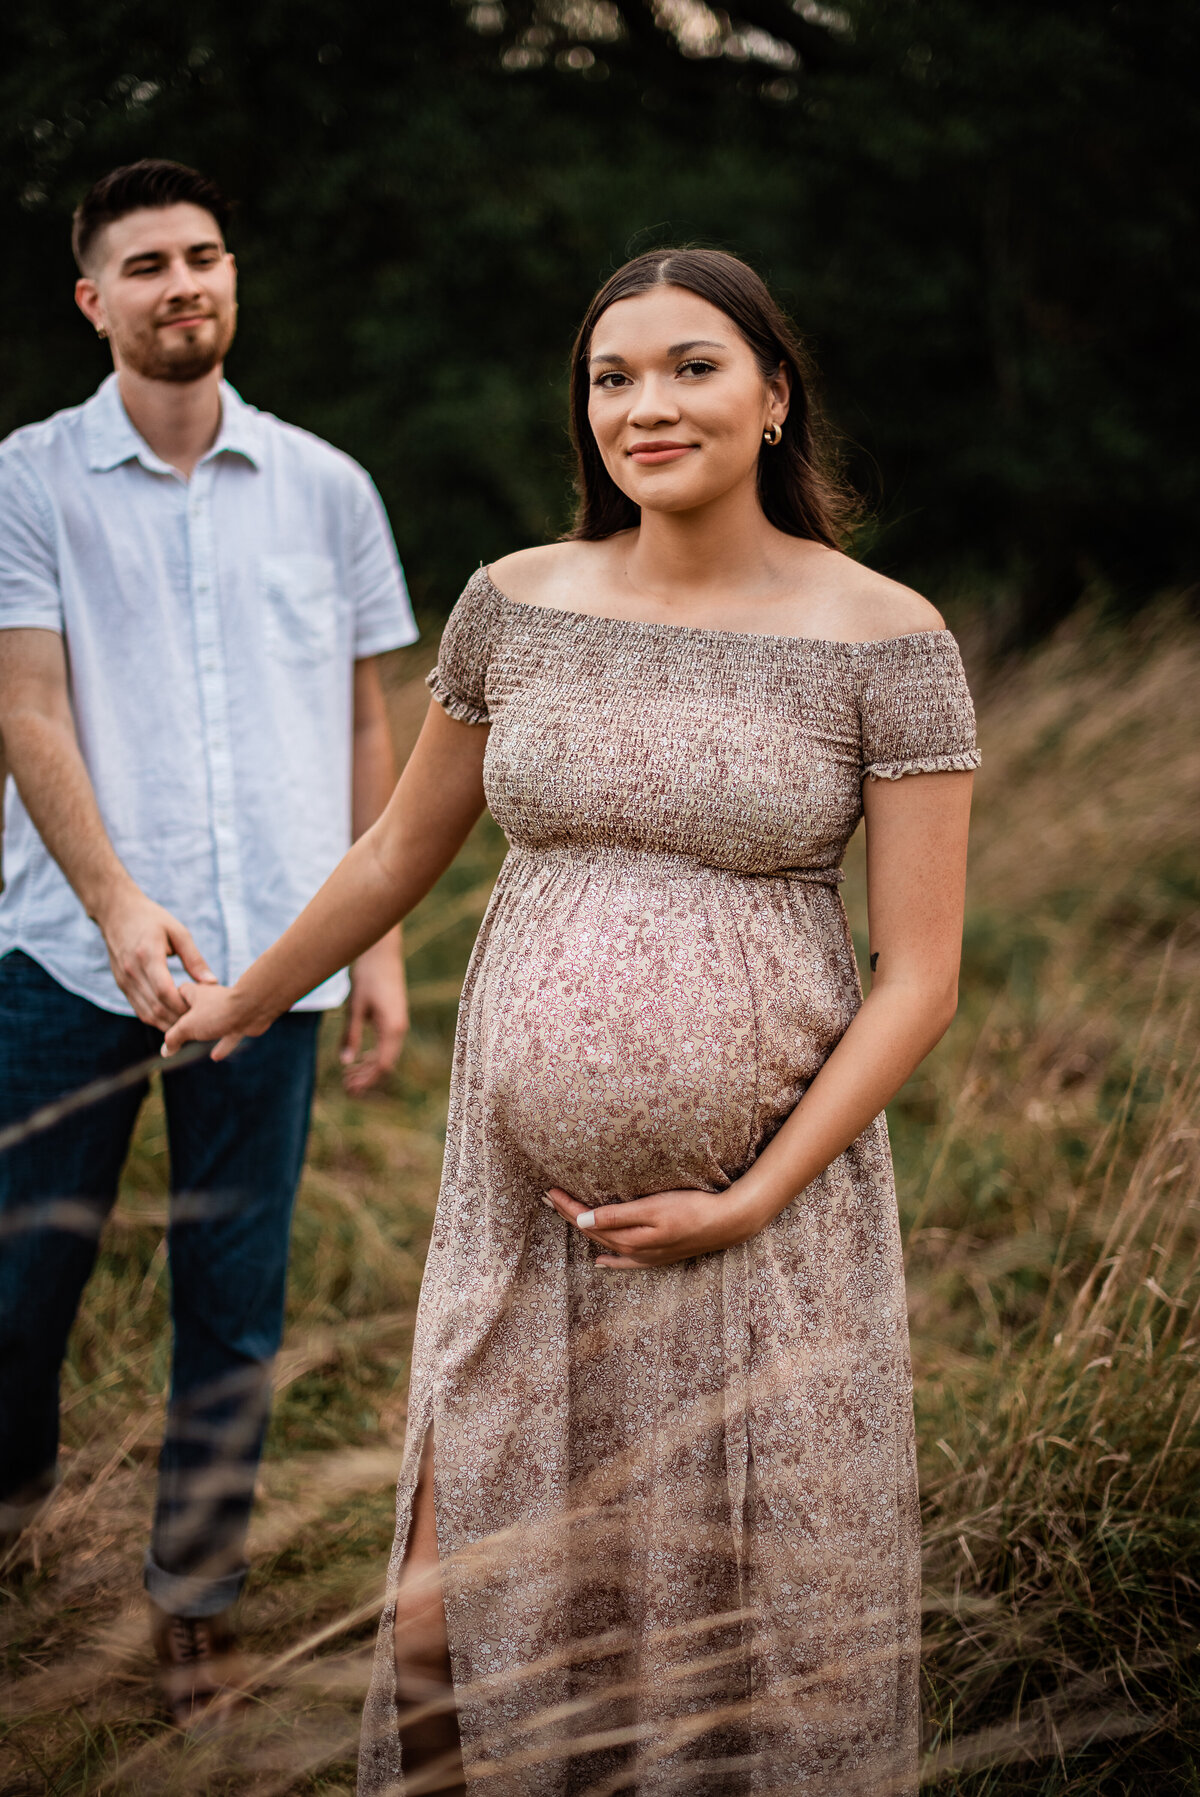 A pregnant woman holds her boyfriend's hand and smiles at the camera while he looks at her lovingly.